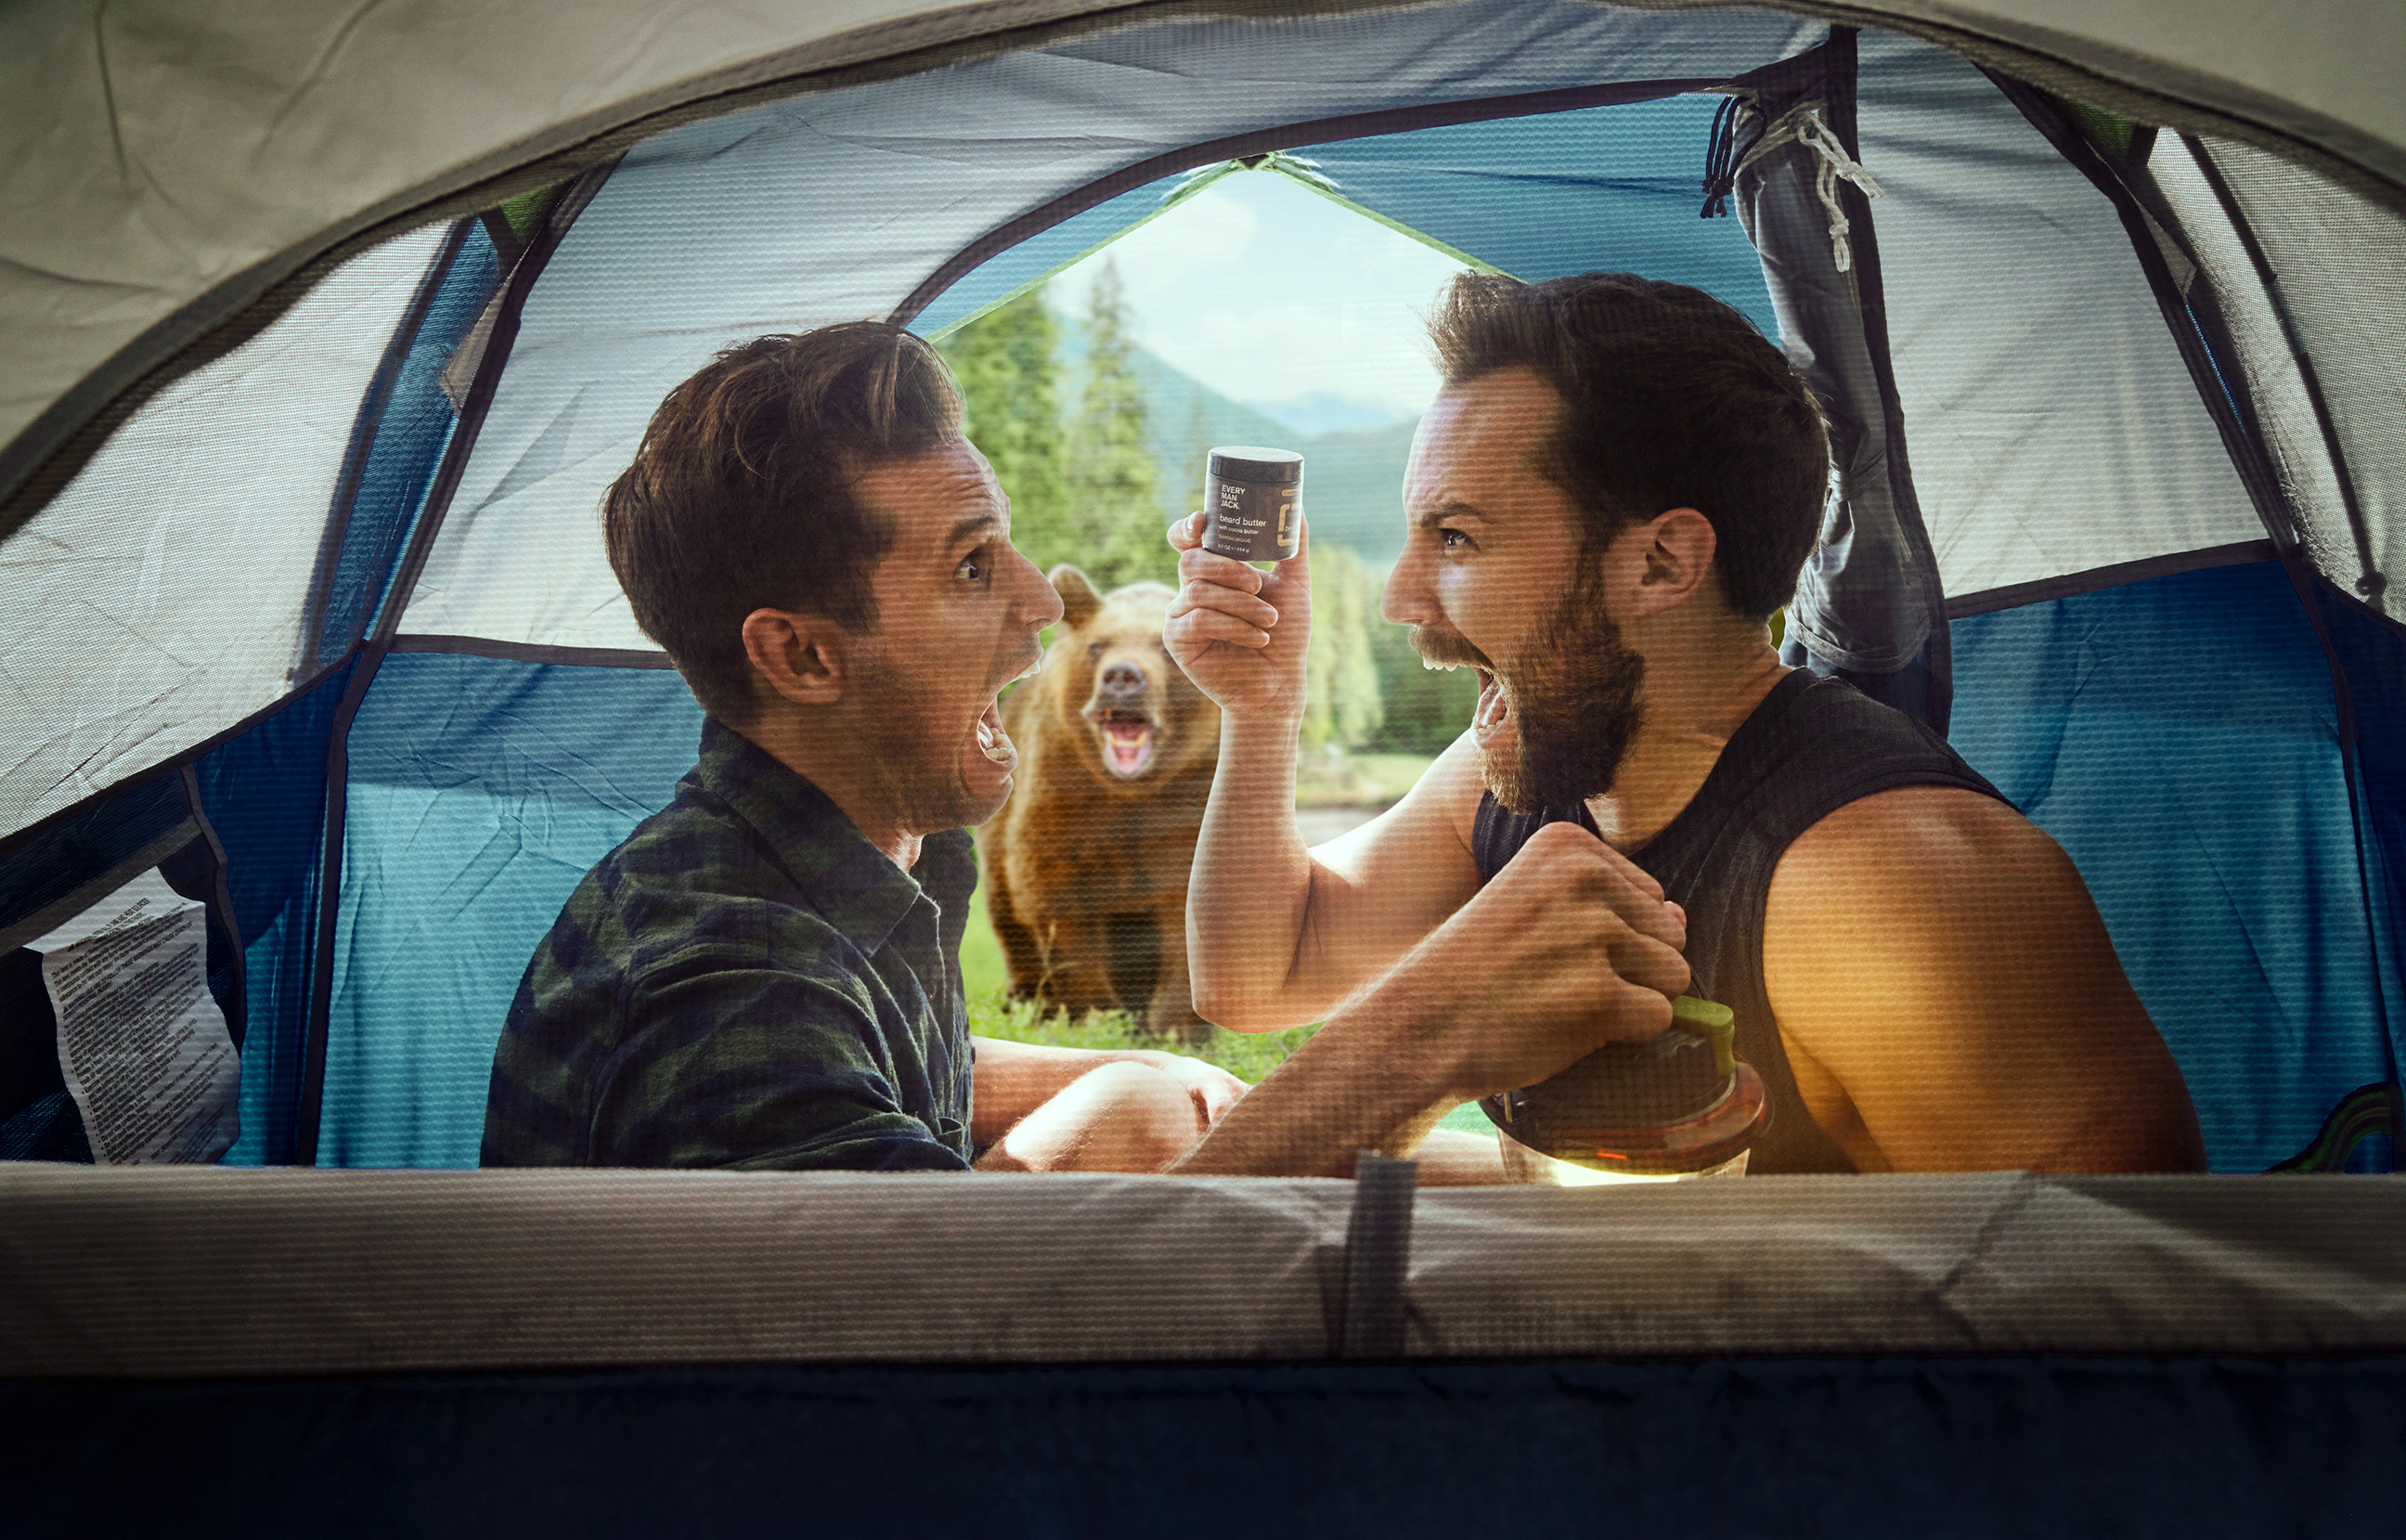 Philadelphia_advertising_Photographer_Every_Man_Jack_Commercial_Photography_Campaign_Lifestyle_mens_grooming_Ad_camping